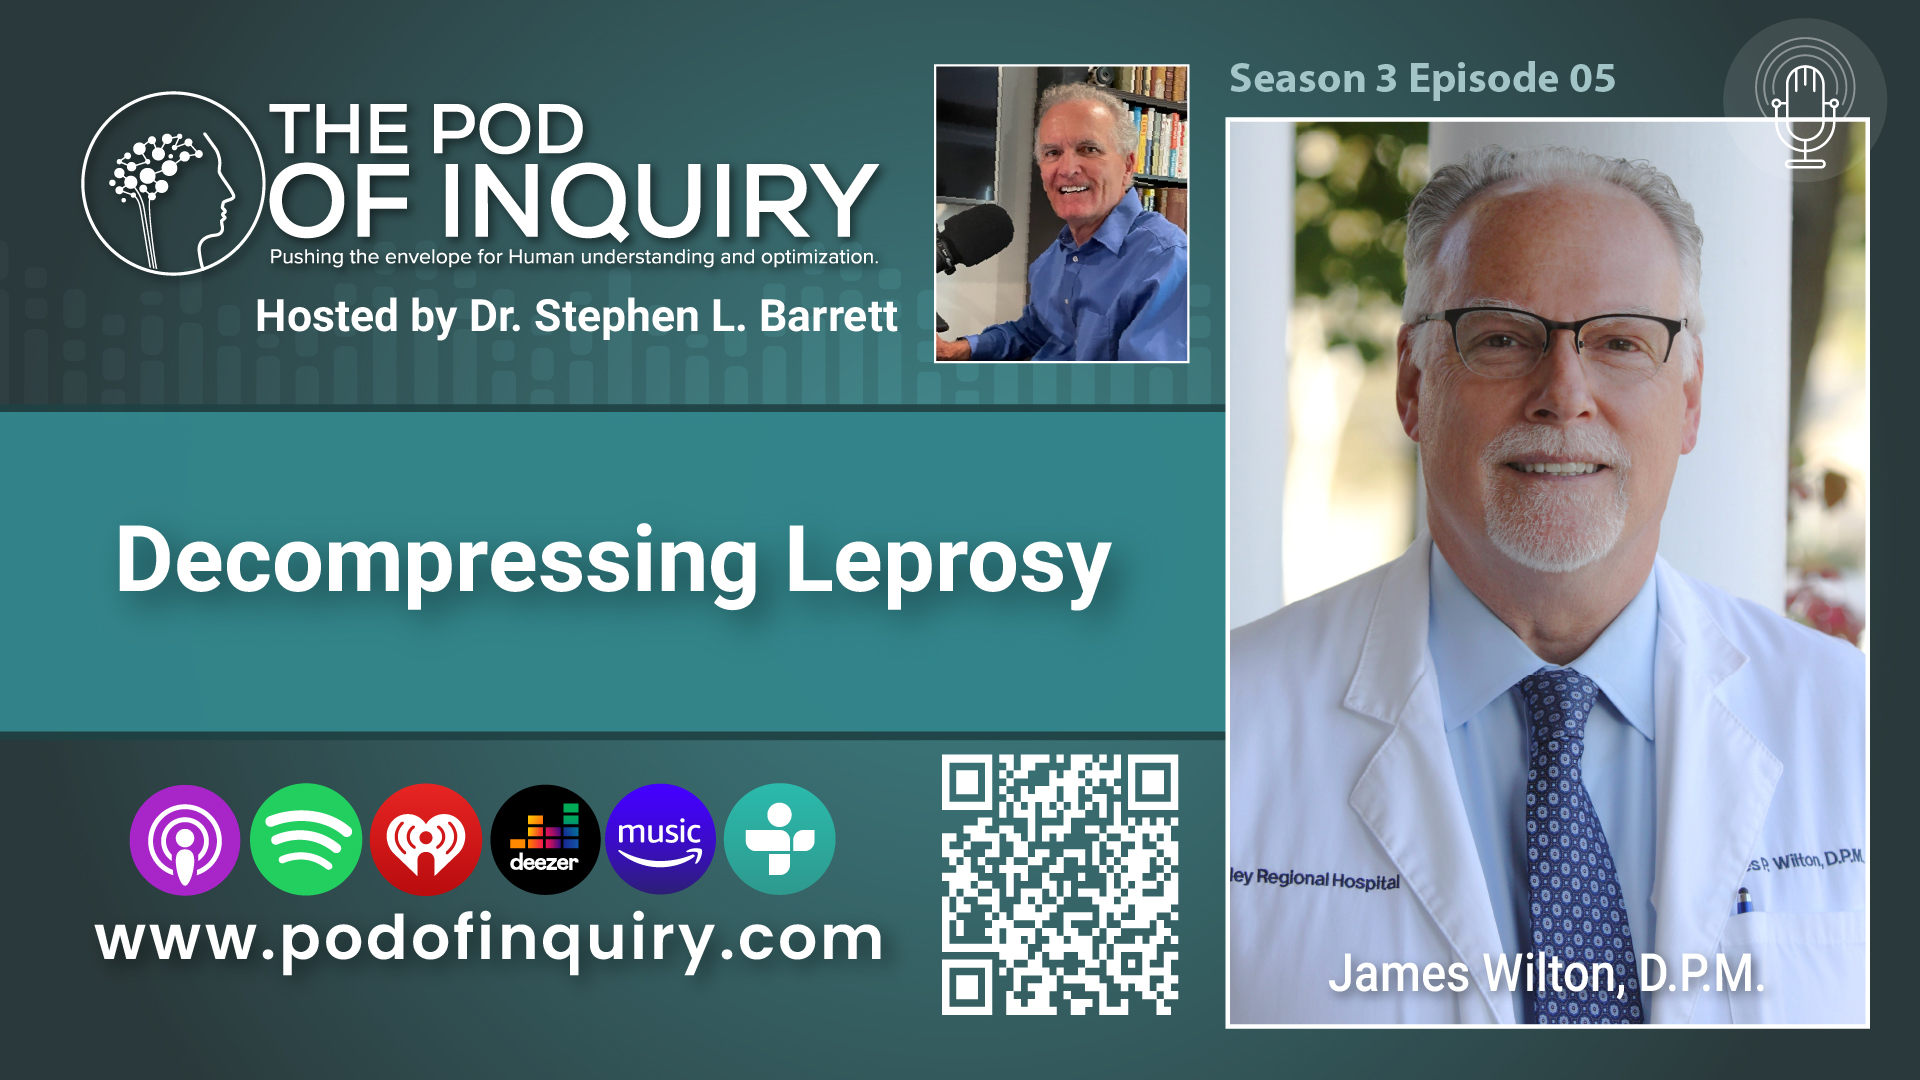 Decompressing Leprosy with James Wilton, D.P.M.